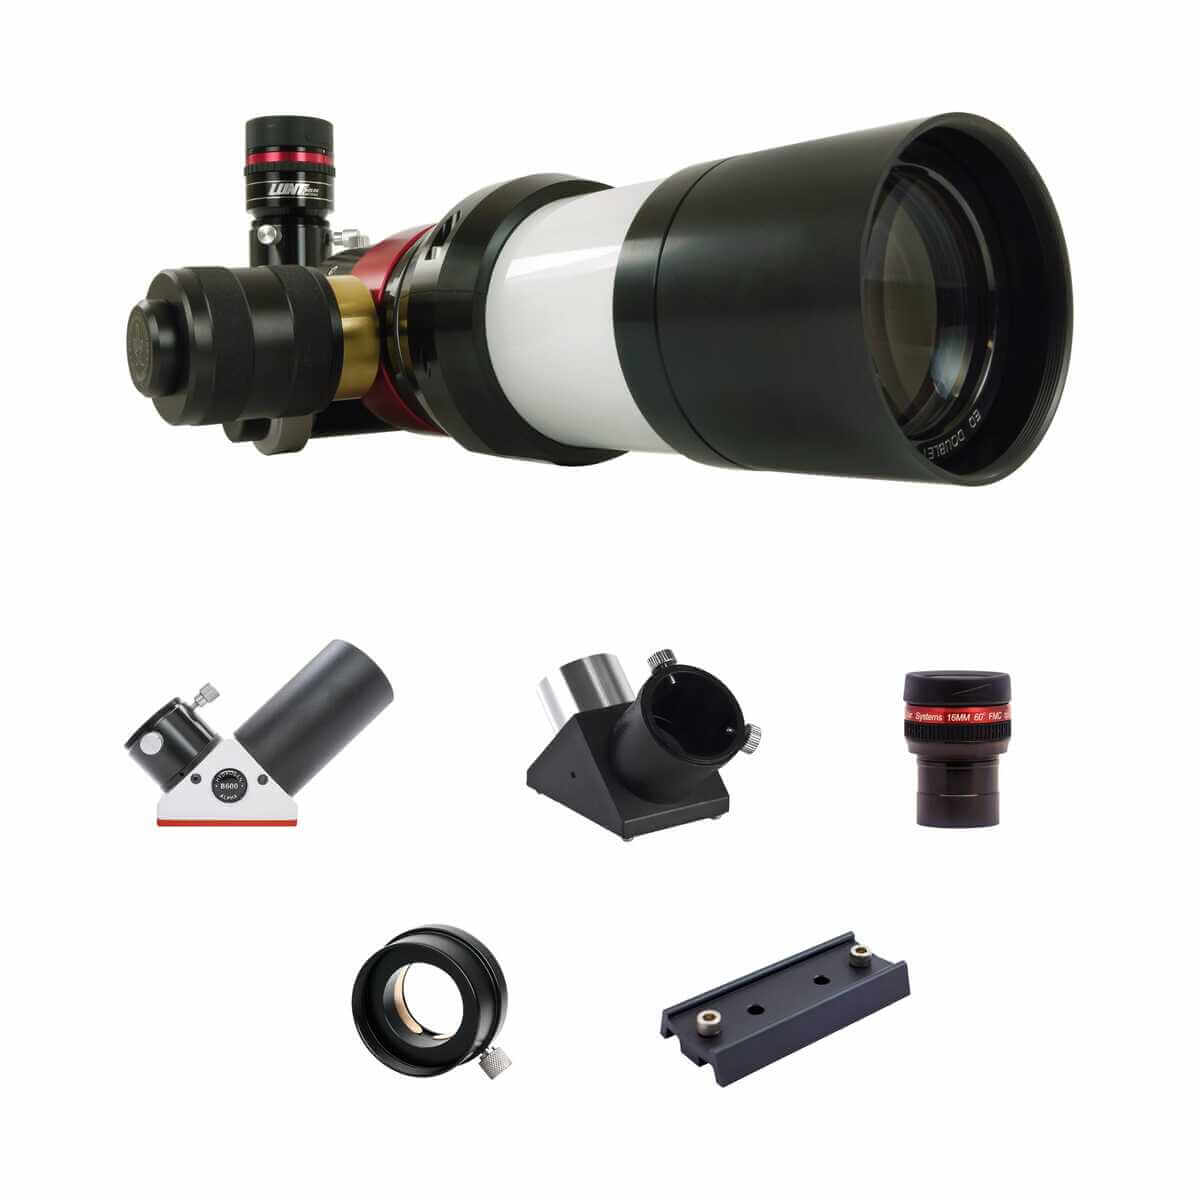 Image of Lunt 60mm Universal Day & Night Use Modular Telescope (Starter Package)